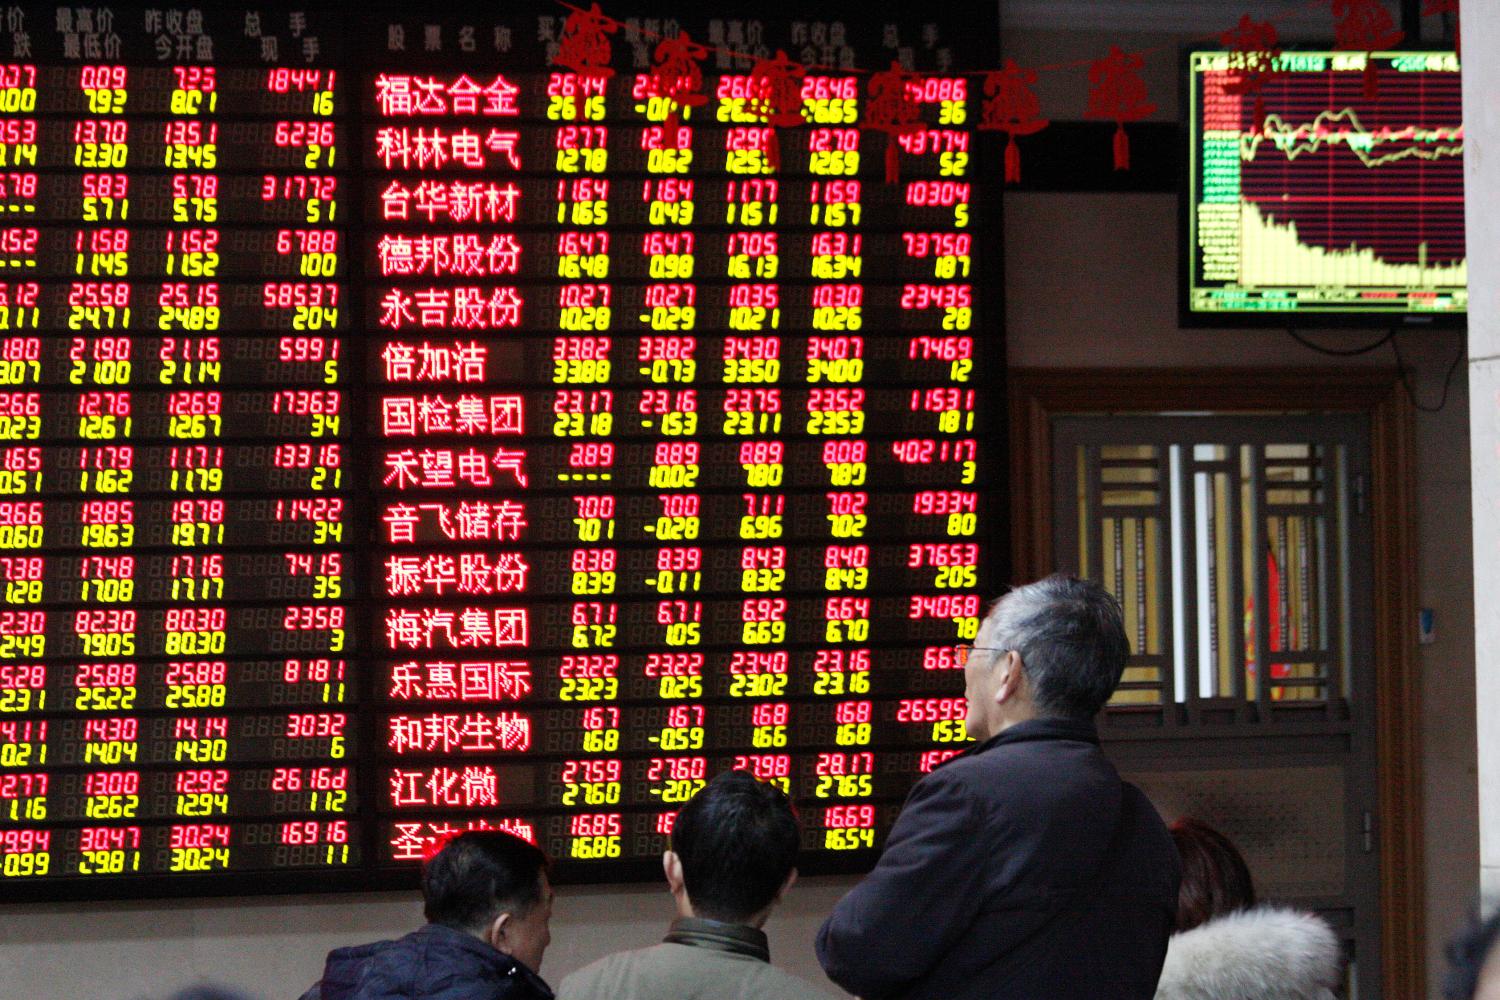 A Chinese investor looks at stock index and prices of shares (red for price rising and green for price falling) at a stock brokerage house in Nanjing city, east China's Jiangsu province, 14 February 2019.The China stock market on Thursday wrote a finish to the five-day winning streak in which it had surged almost 150 points or 5.9 percent. The Shanghai Composite Index now rests just beneath the 2,720-point plateau and it may extend its losses on Friday (15 February 2019). The global forecast for the Asian markets is mixed to lower on concerns for trade and the outlook for interest rates. The European and U.S. markets were mostly lower and the Asian markets are likely to open in similar fashion. The SCI finished barely lower on Thursday following losses from the energy producers, while the financials and properties came in mixed. For the day, the index dipped 1.37 points or 0.05 percent to finish at 2,719.70 after trading between 2,707.49 and 2,729.46. The Shenzhen Composite Index rose 9.16 points or 0.66 percent to end at 1,398.84.No Use China. No Use France.